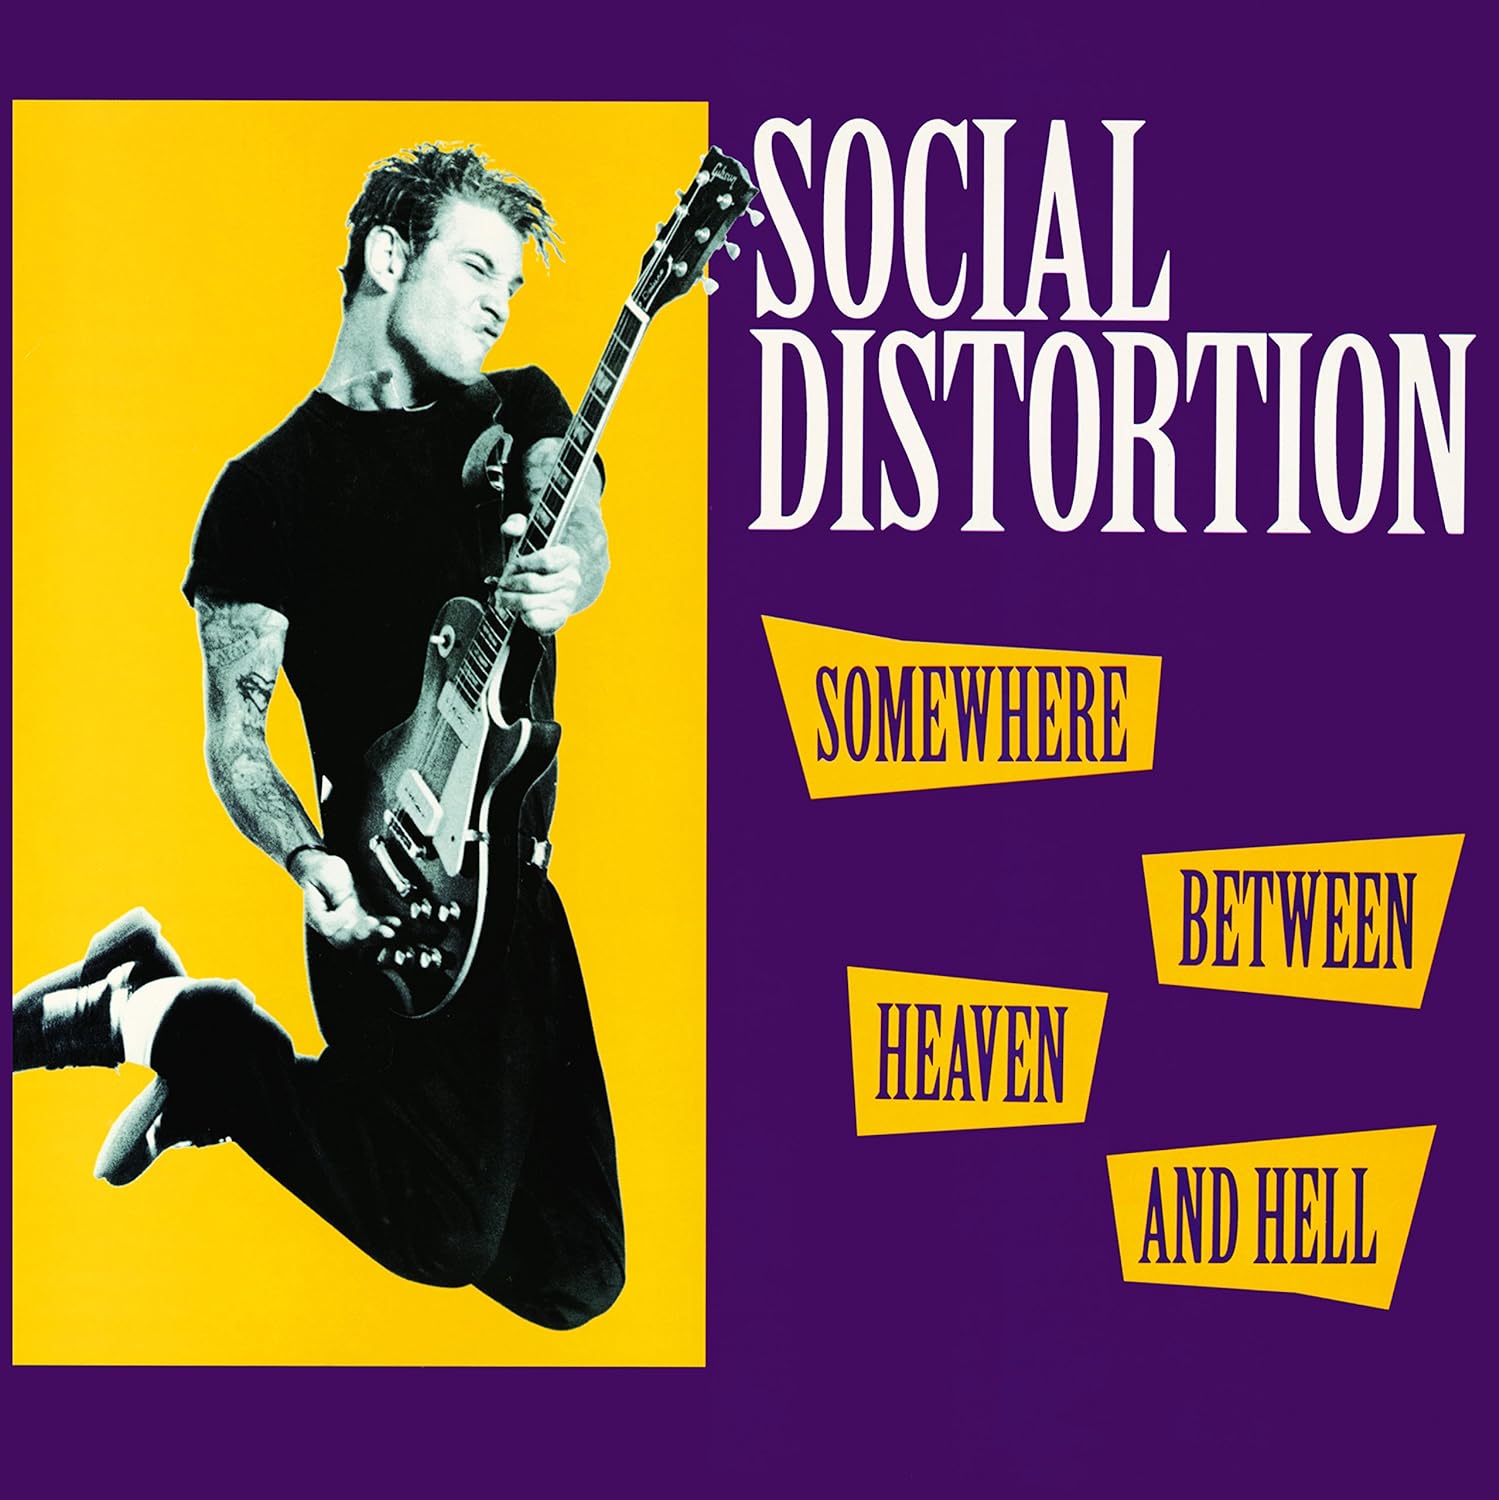 Social Distortion: Somewhere Between Heaven and Hell: 180g Black Vinyl Reissue (Import) - Steadfast Records